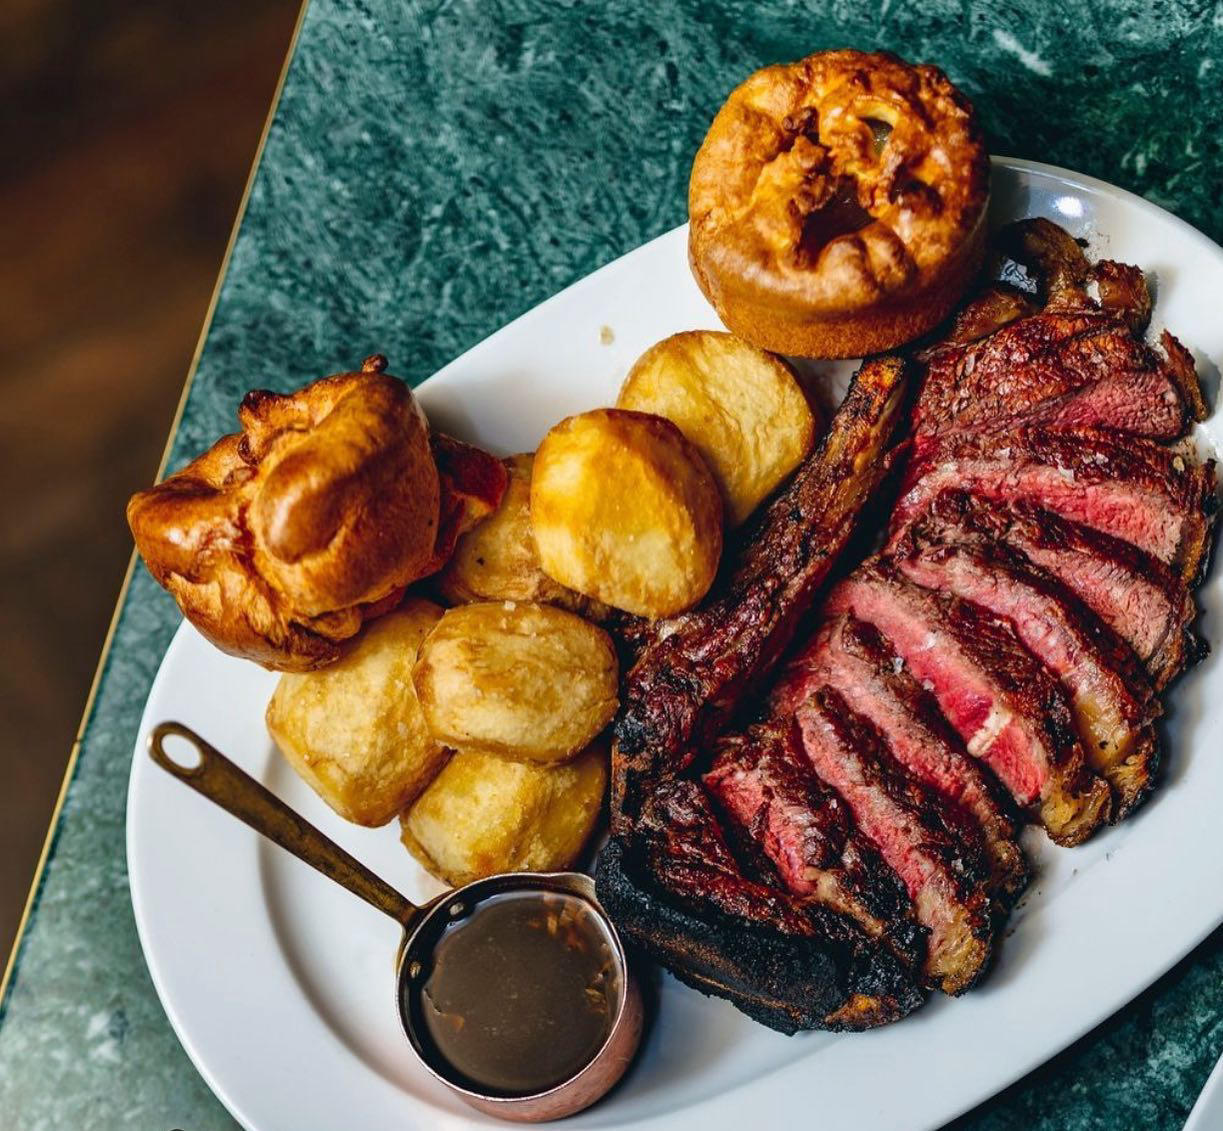 World's Best Steak Restaurants - The Cut #thecoalshed our No